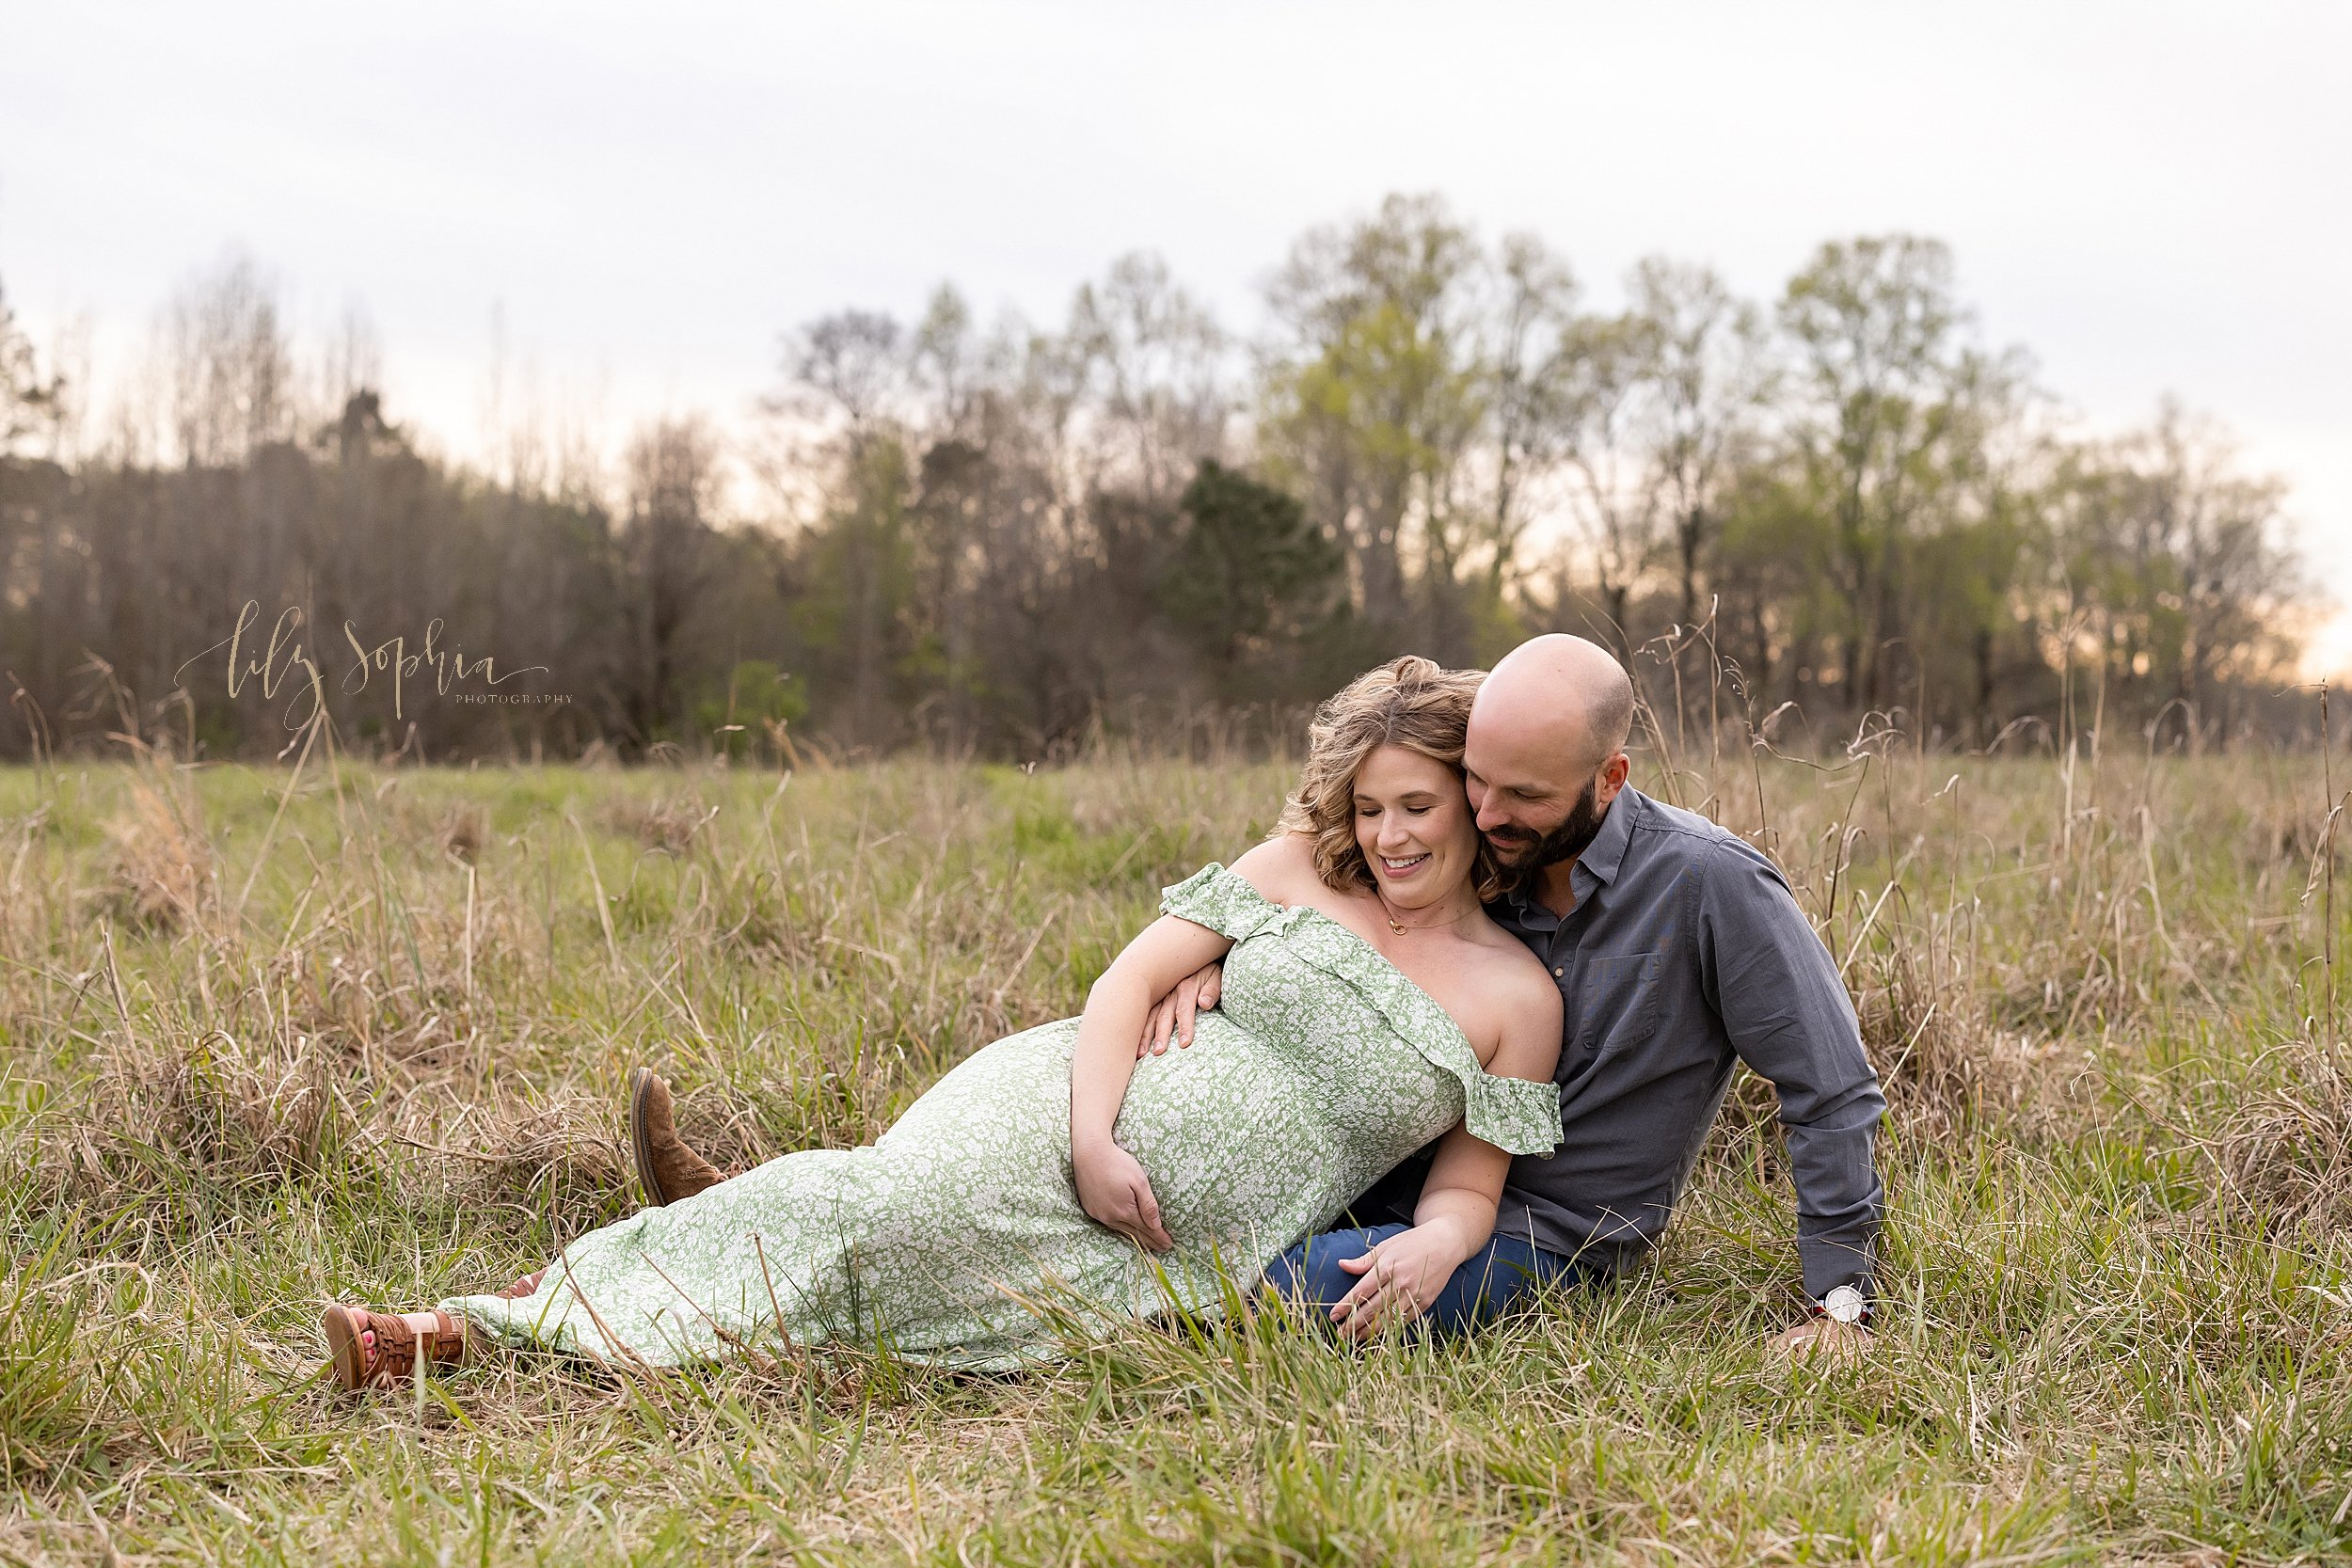  Maternity photo taken in a field near Atlanta, Georgia during winter of an expectant couple lounging on the grassy field with the mother wearing an off the shoulder printed dress as she leans against her husband while holding the base of her belly a